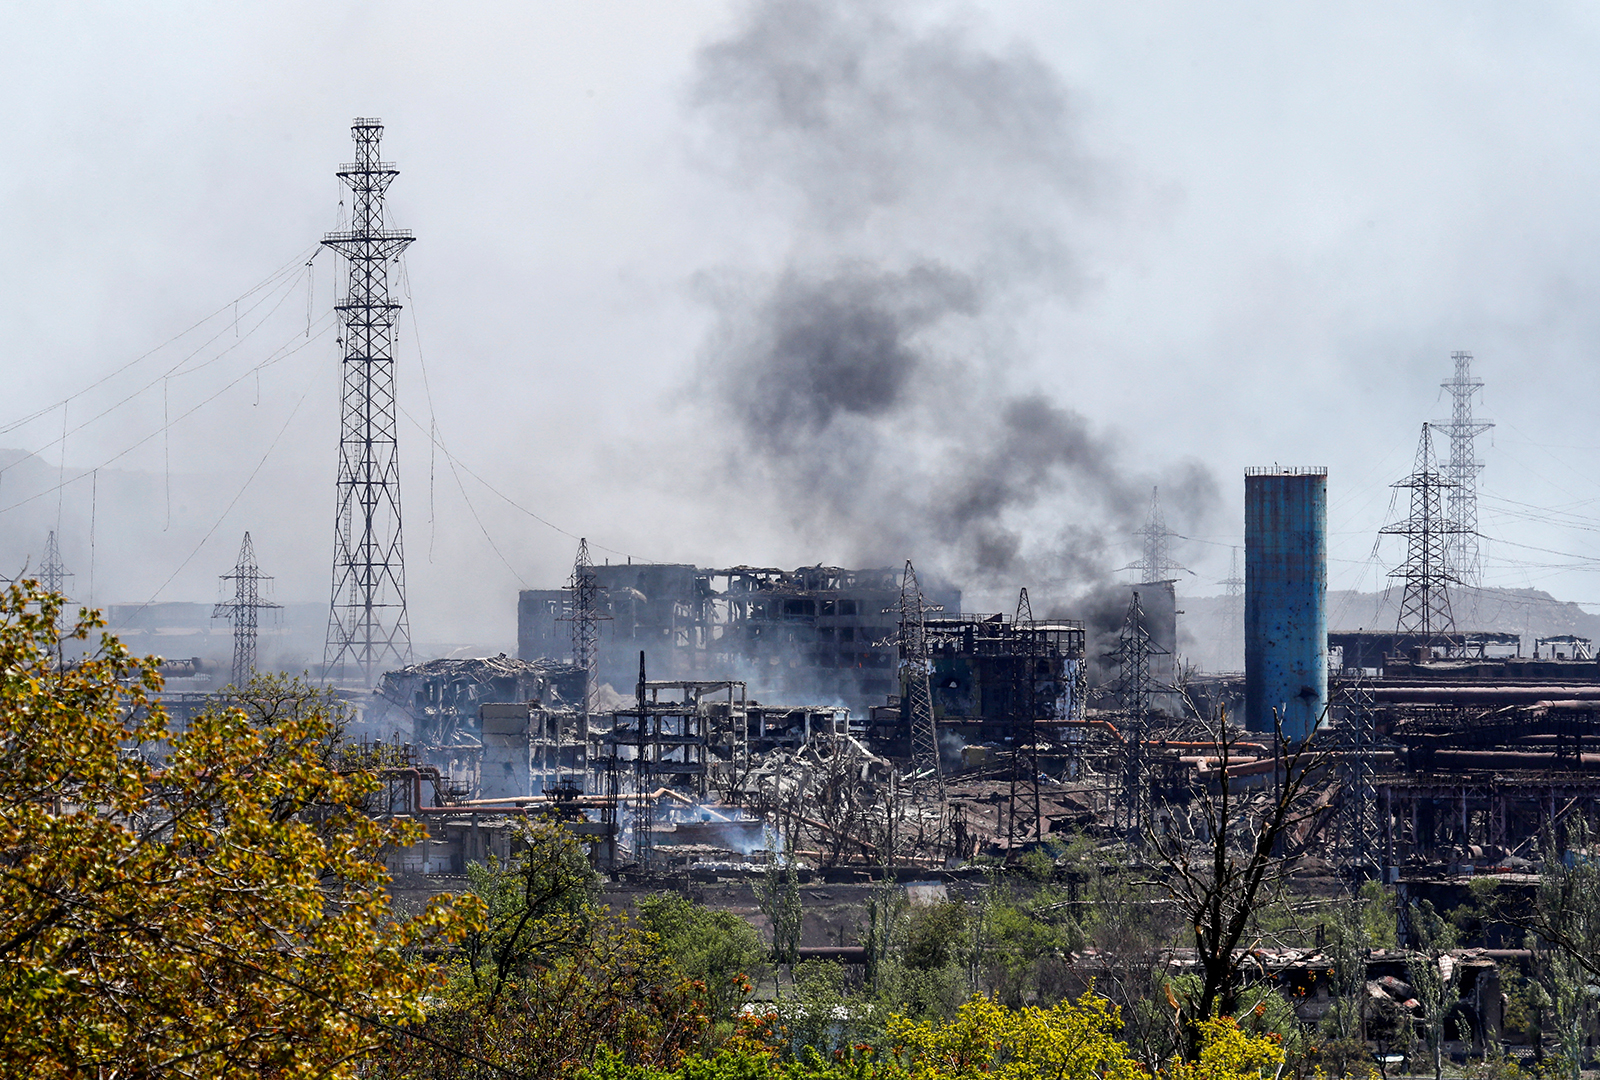 Smoke rises following an explosion at a plant of Azovstal Iron and Steel Works during Ukraine-Russia conflict in the southern port city of Mariupol, Ukraine May 11.